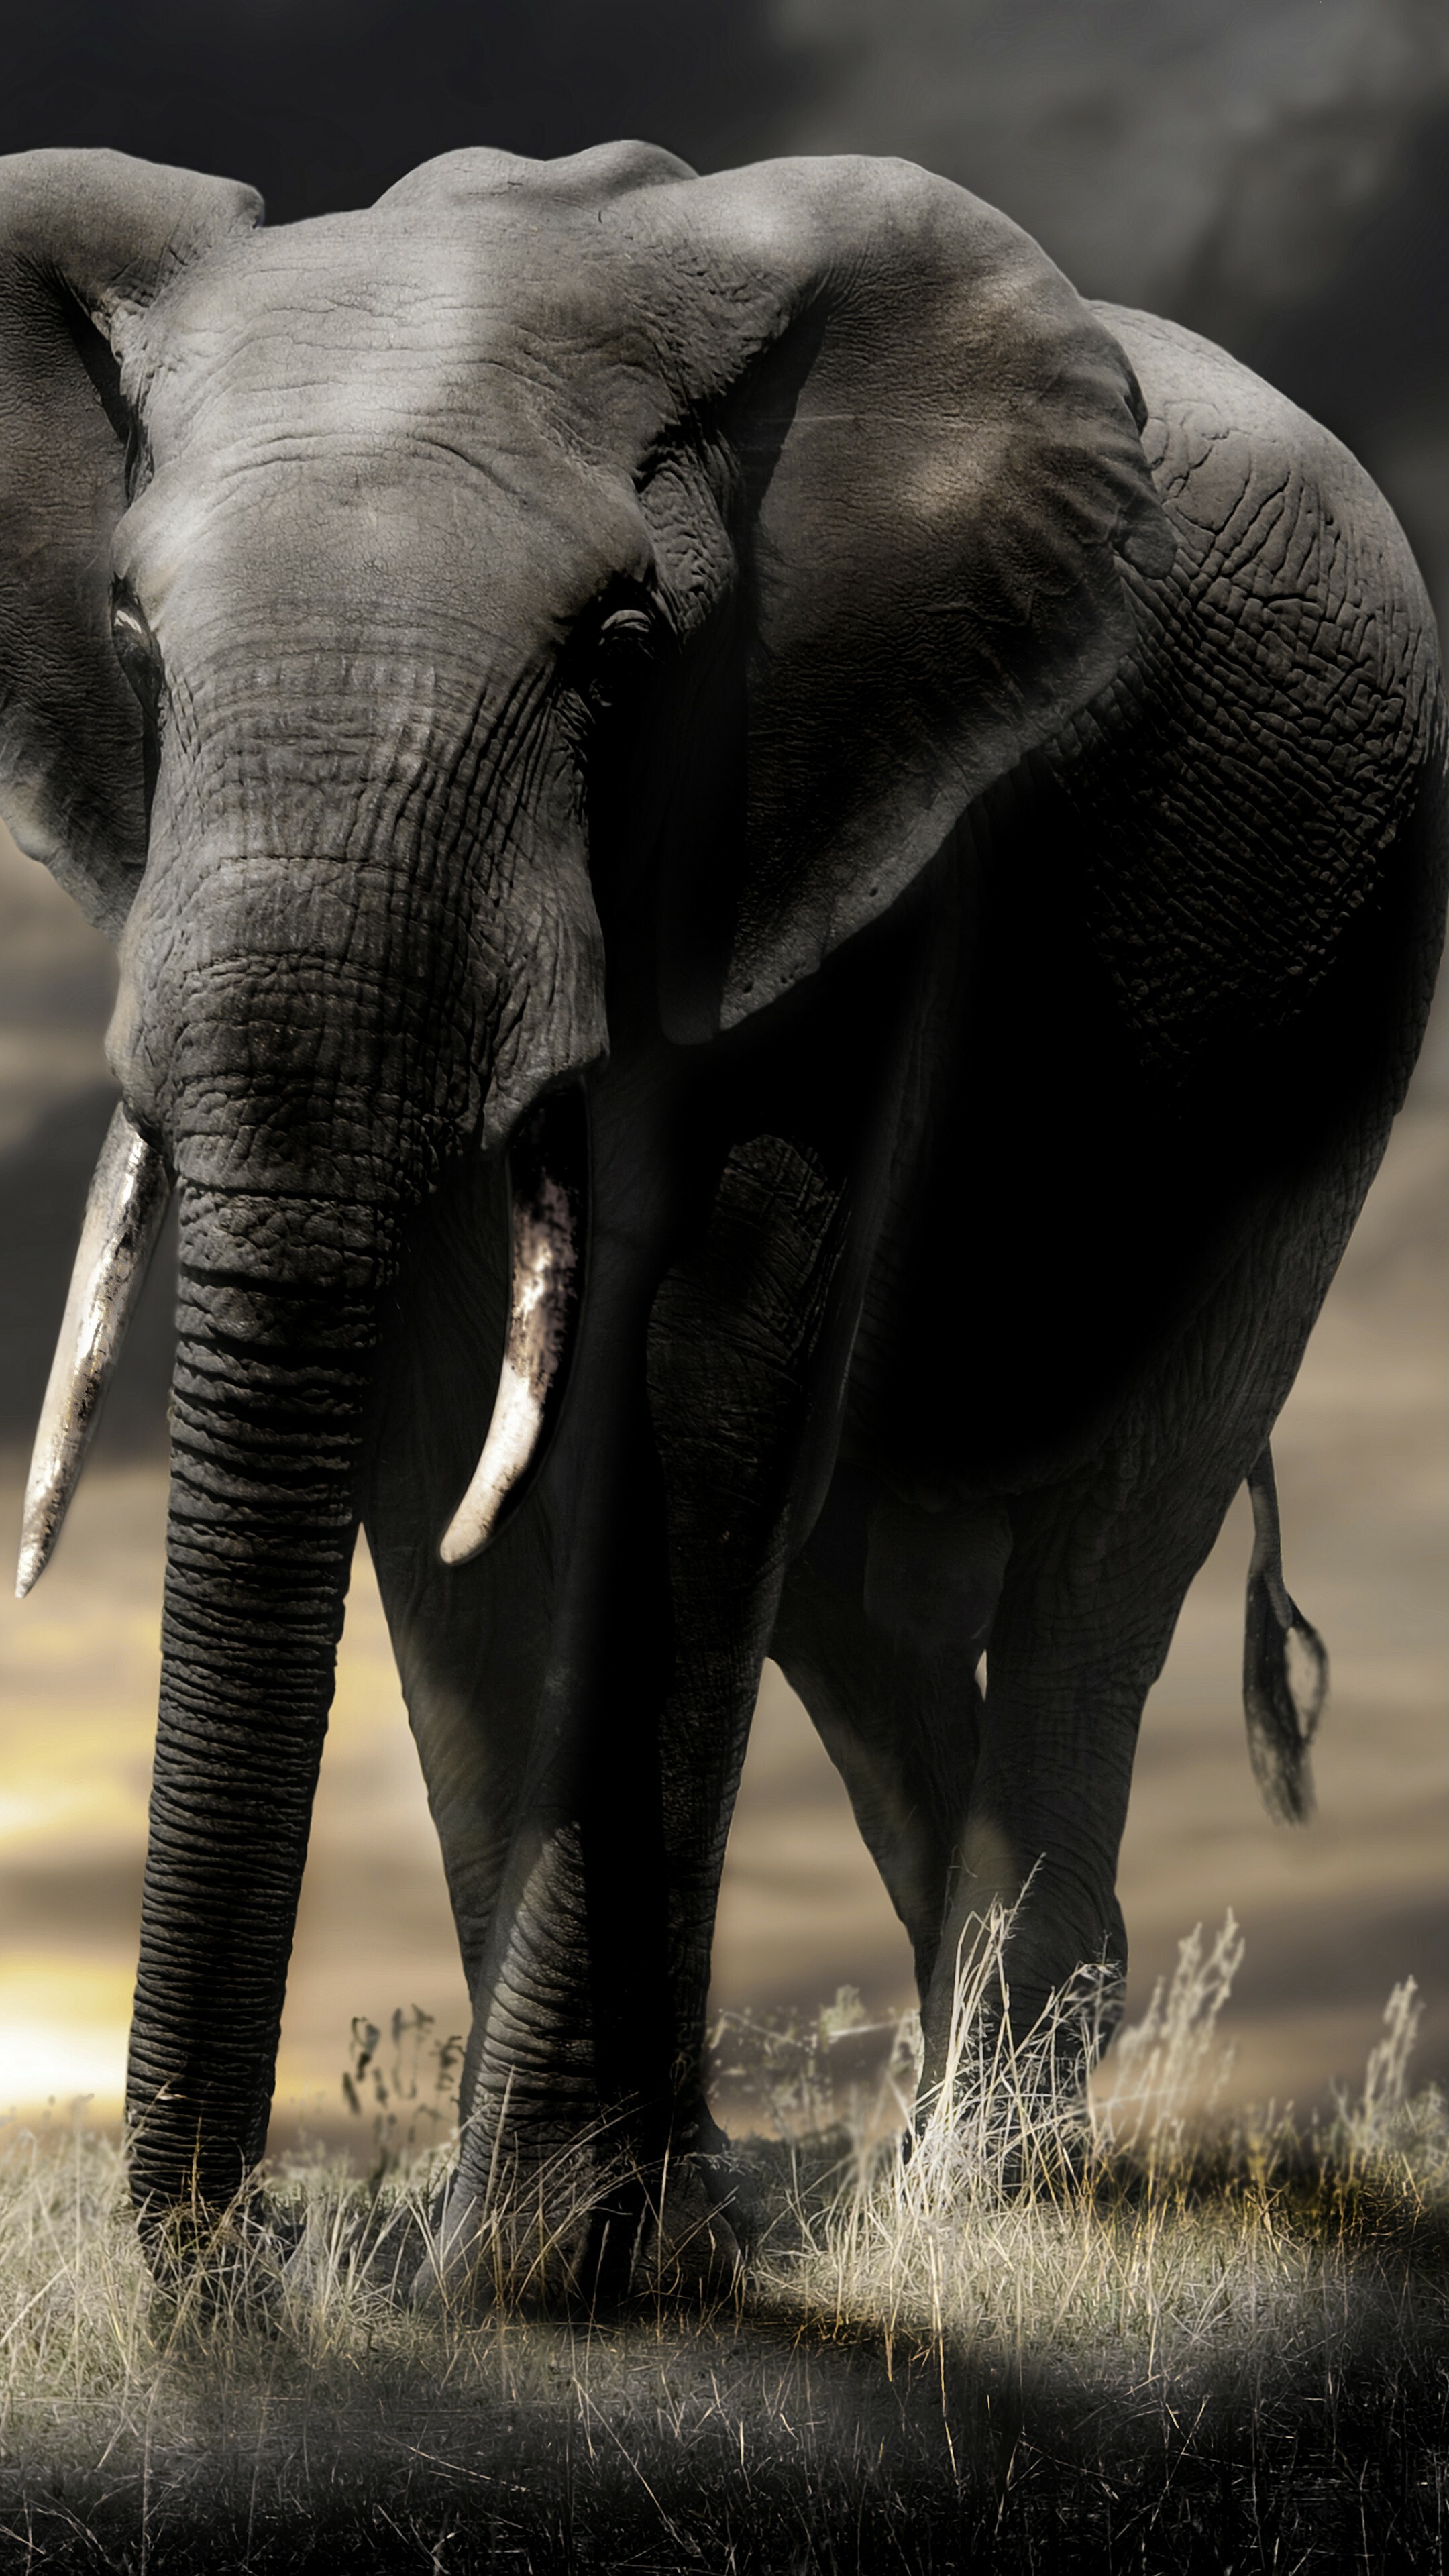 Elephant: The large ear flaps assist in maintaining a constant body temperature as well as in communication. 2160x3840 4K Wallpaper.